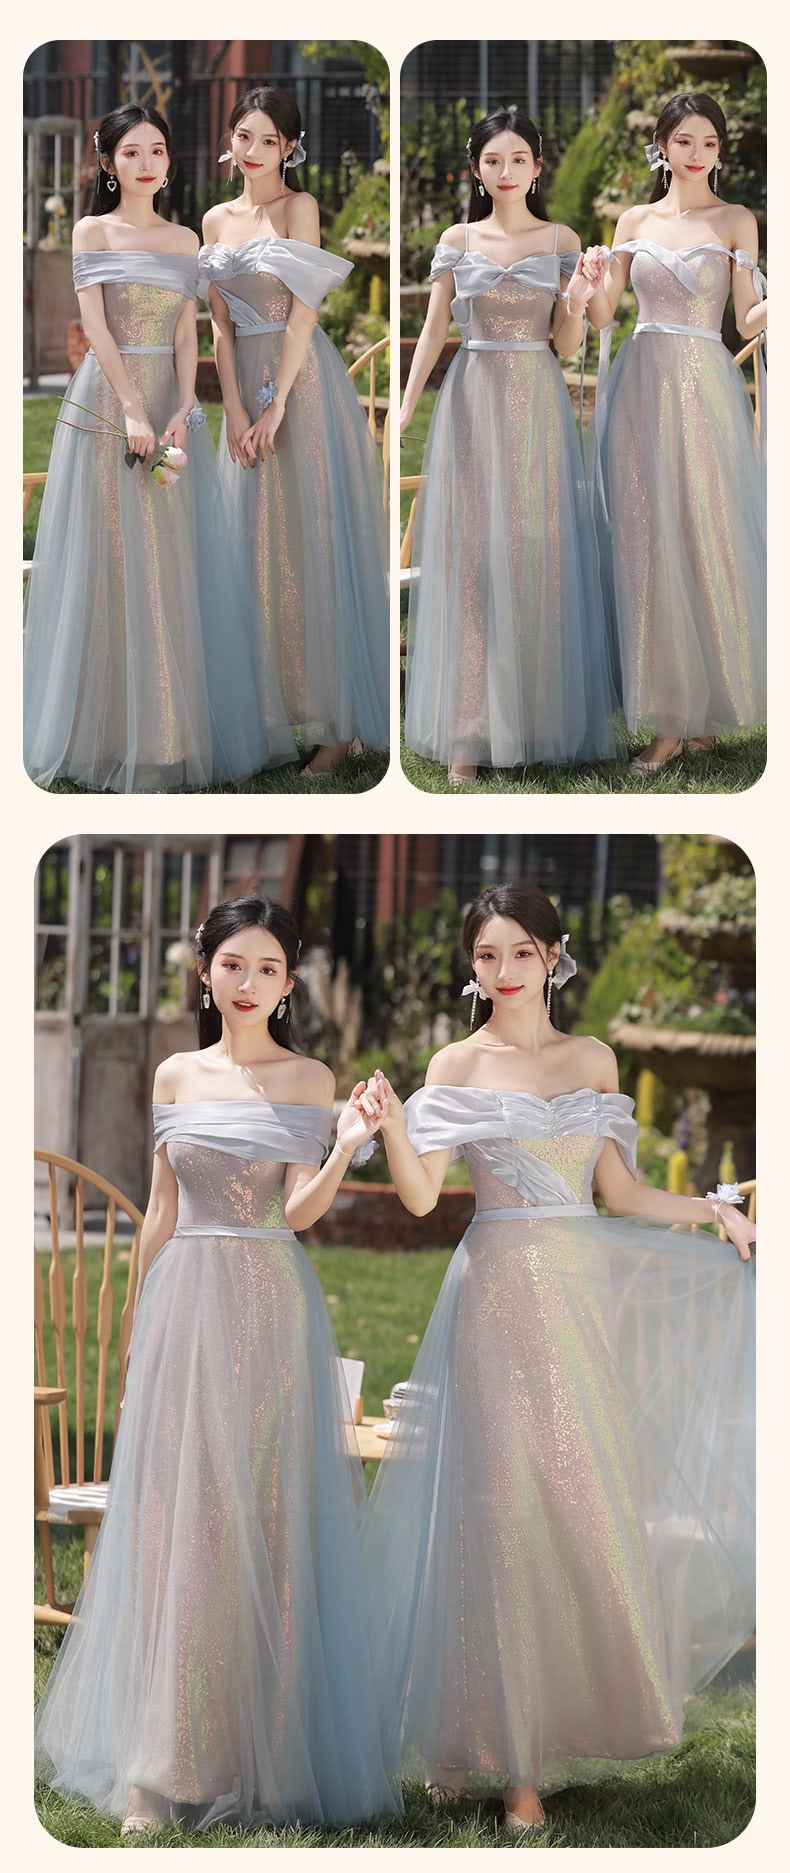 Fairy-Sparkly-Starry-Long-Evening-Prom-Bridesmaid-Dress-Ball-Gown13